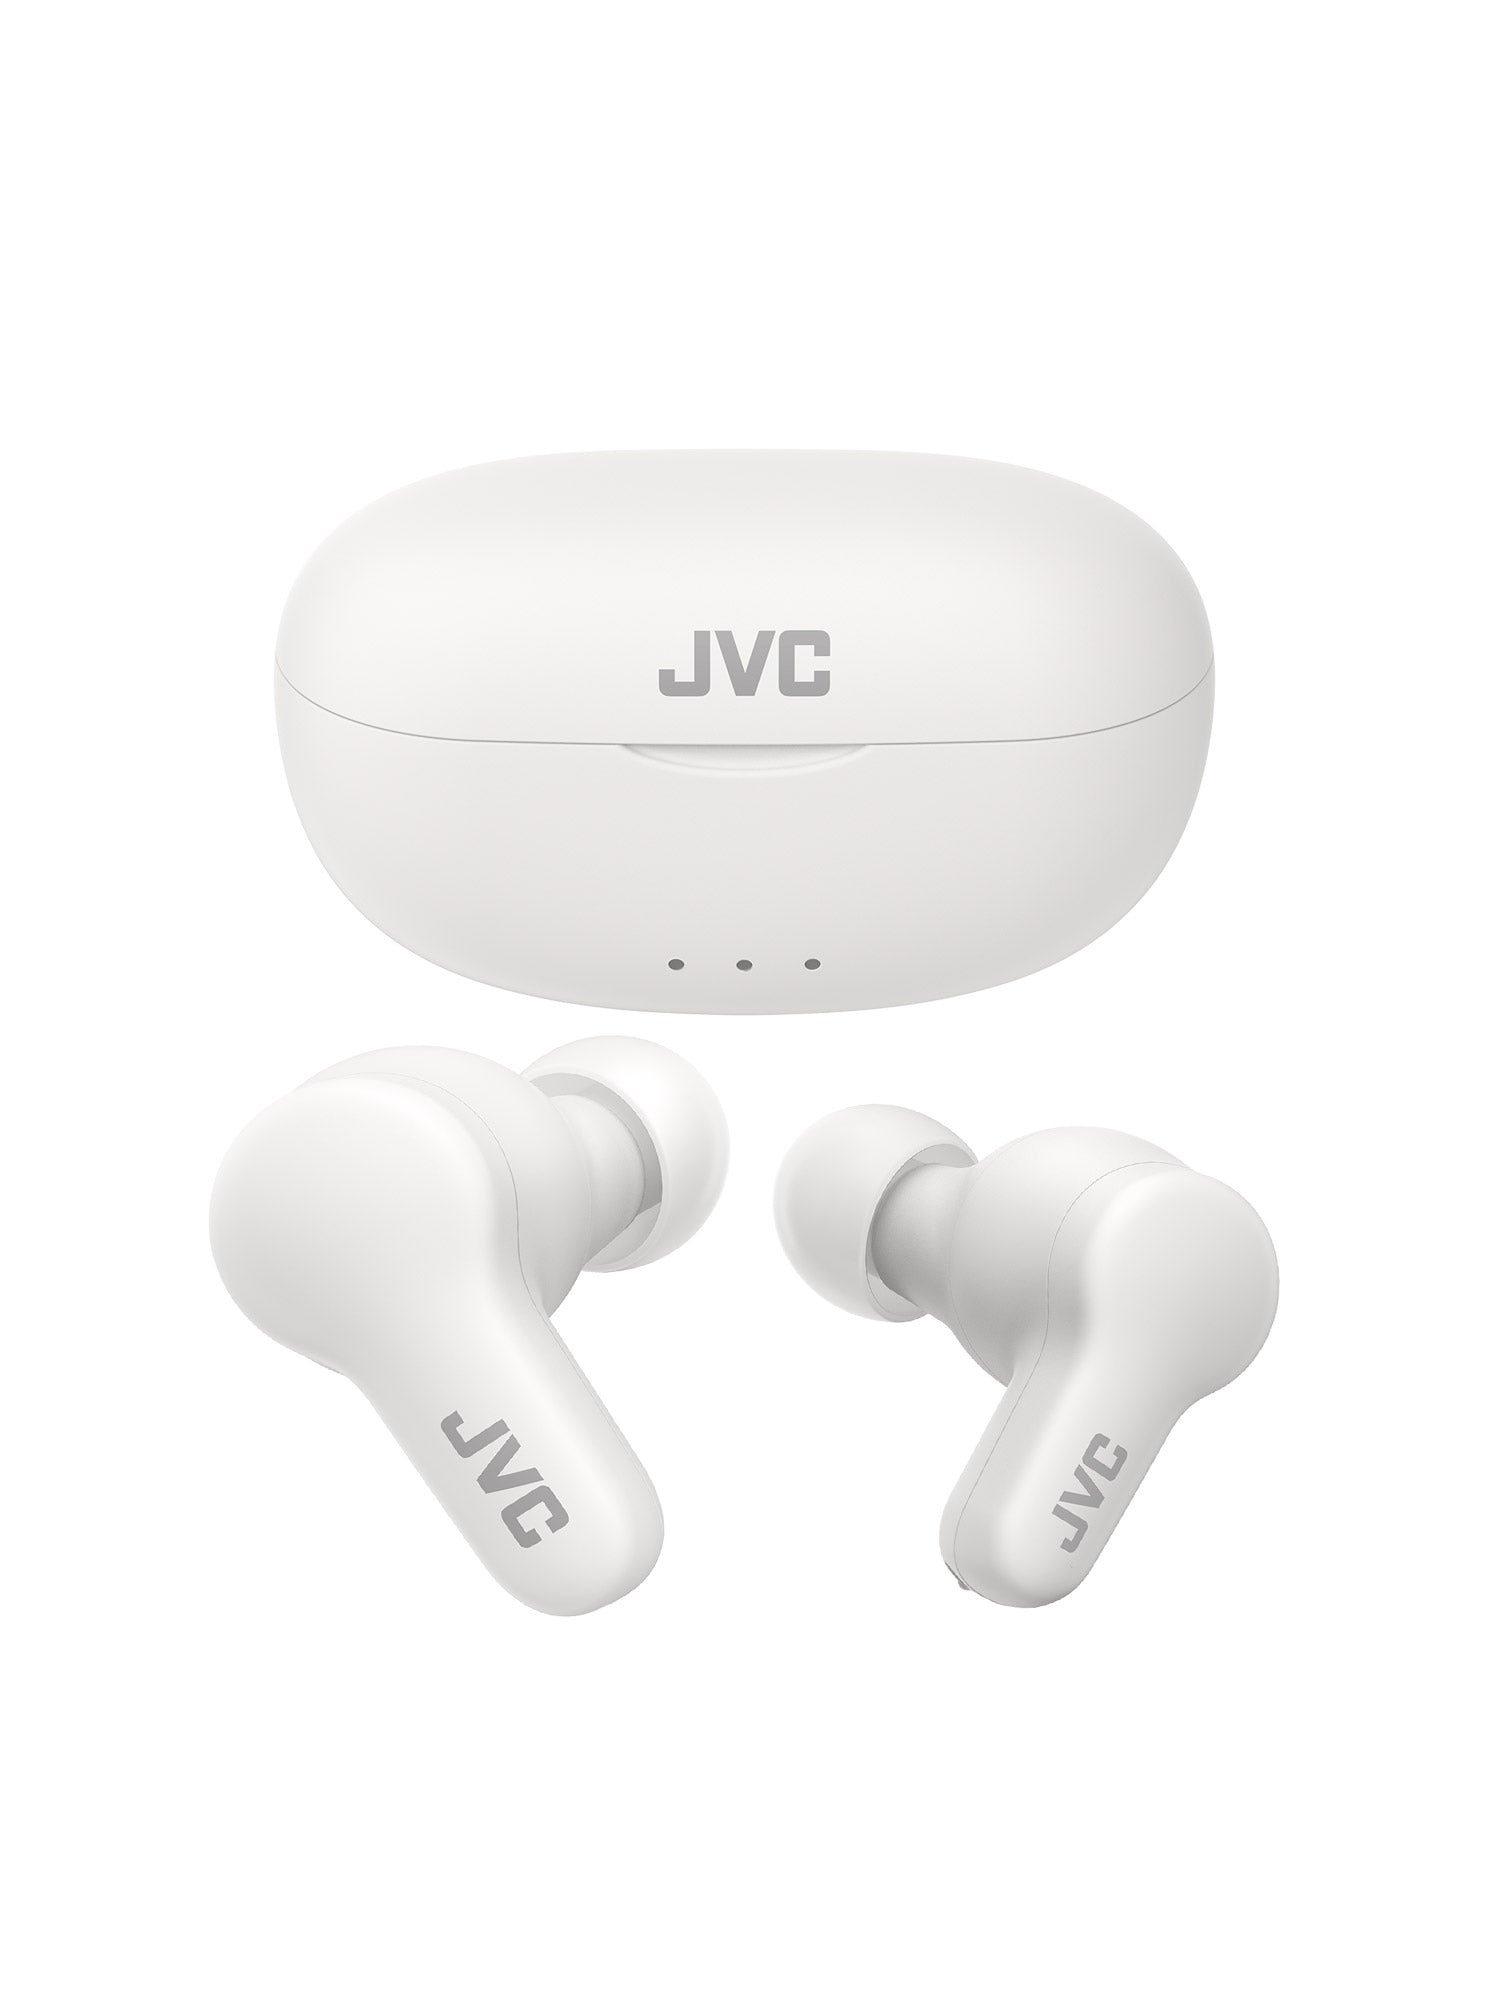 HA-A7T2-W in white wireless earbuds and charging case by JVC